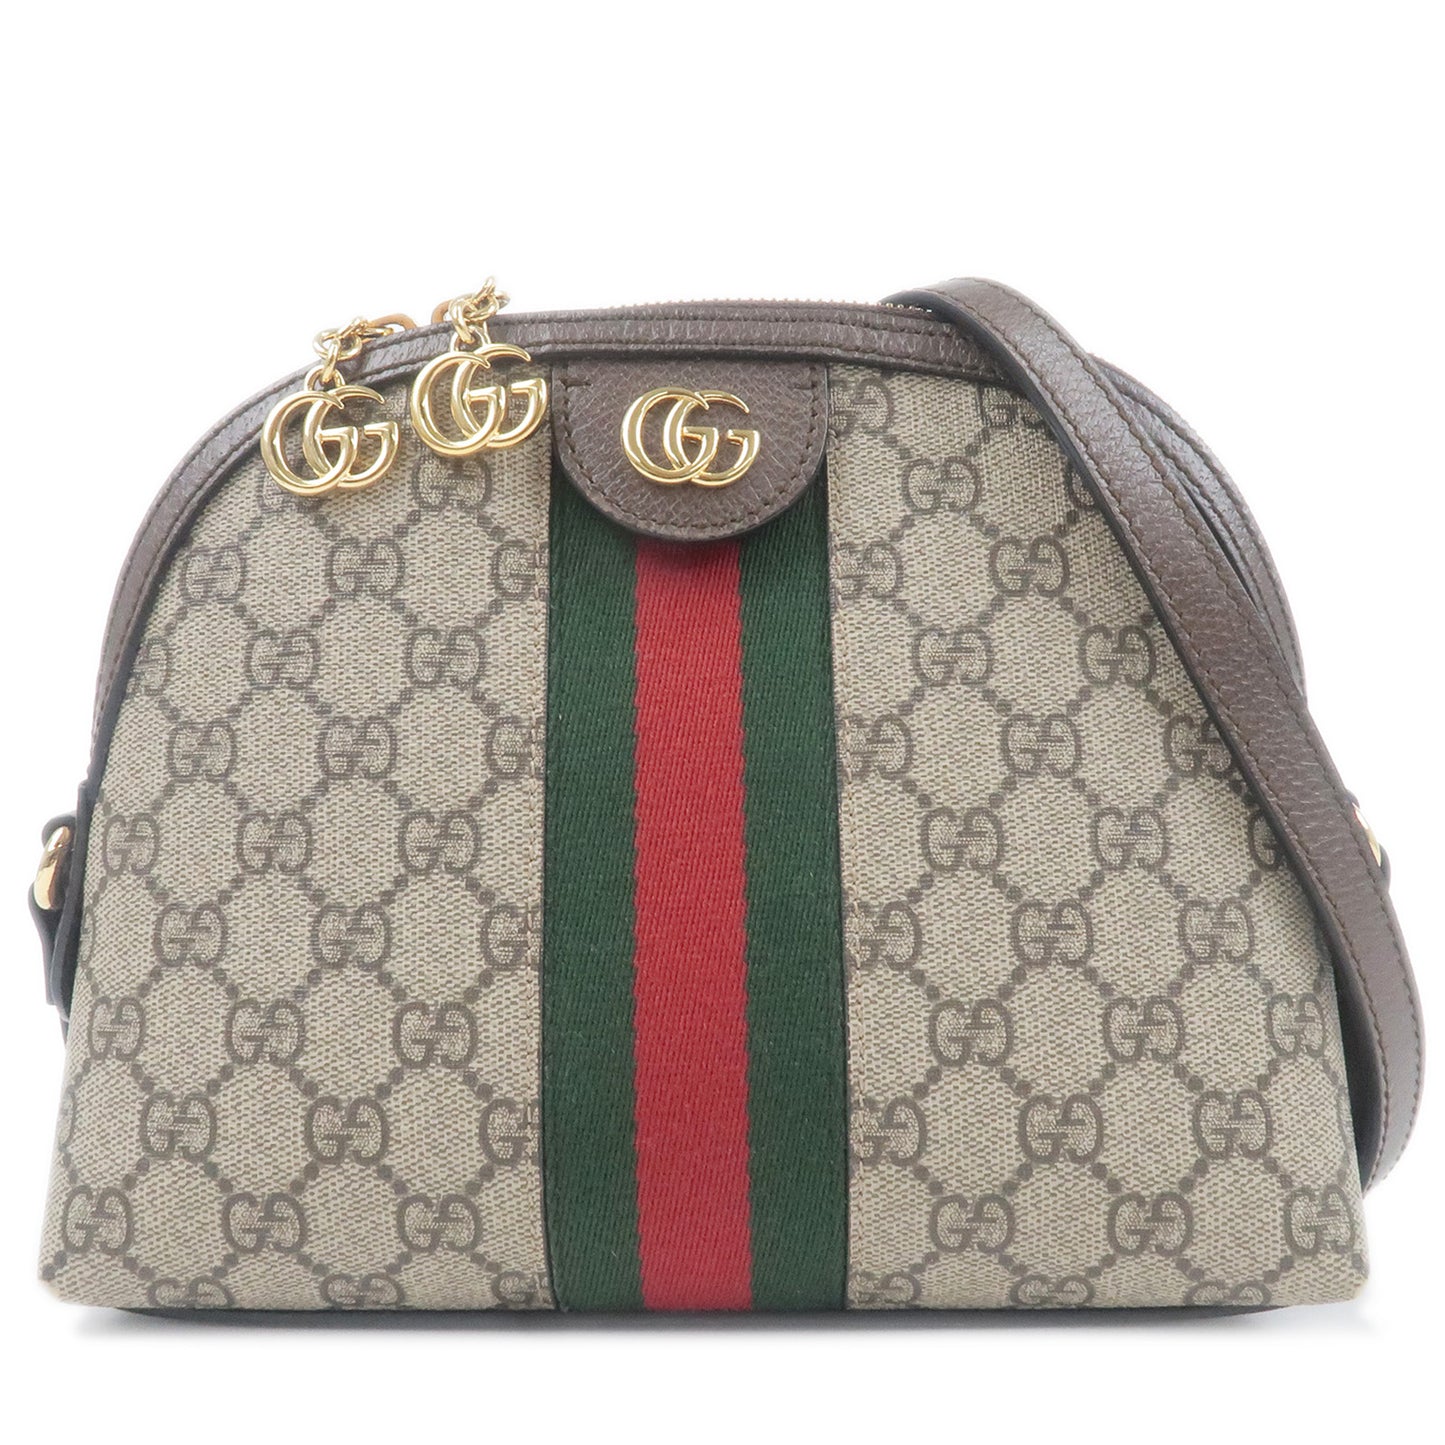 GUCCI-Sherry-Ophidia-GG-Supreme-Leather-Shoulder-Bag-499621